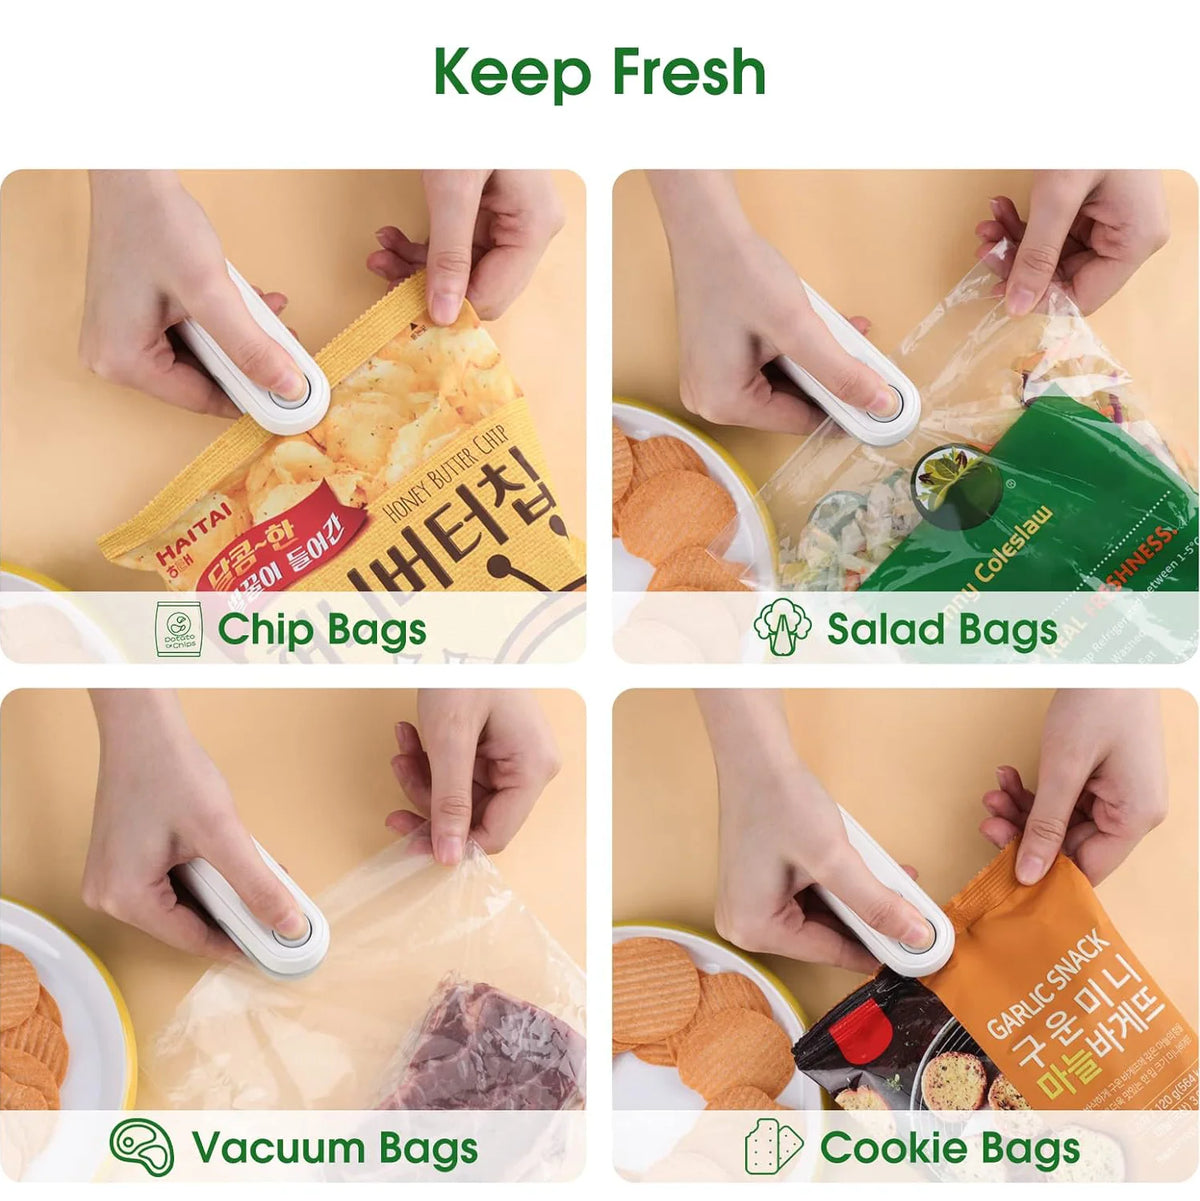 Rechargeable 2-in-1 Mini Heat Sealer: Portable Solution for Fresh Snacks and Vacuum Sealing at Home